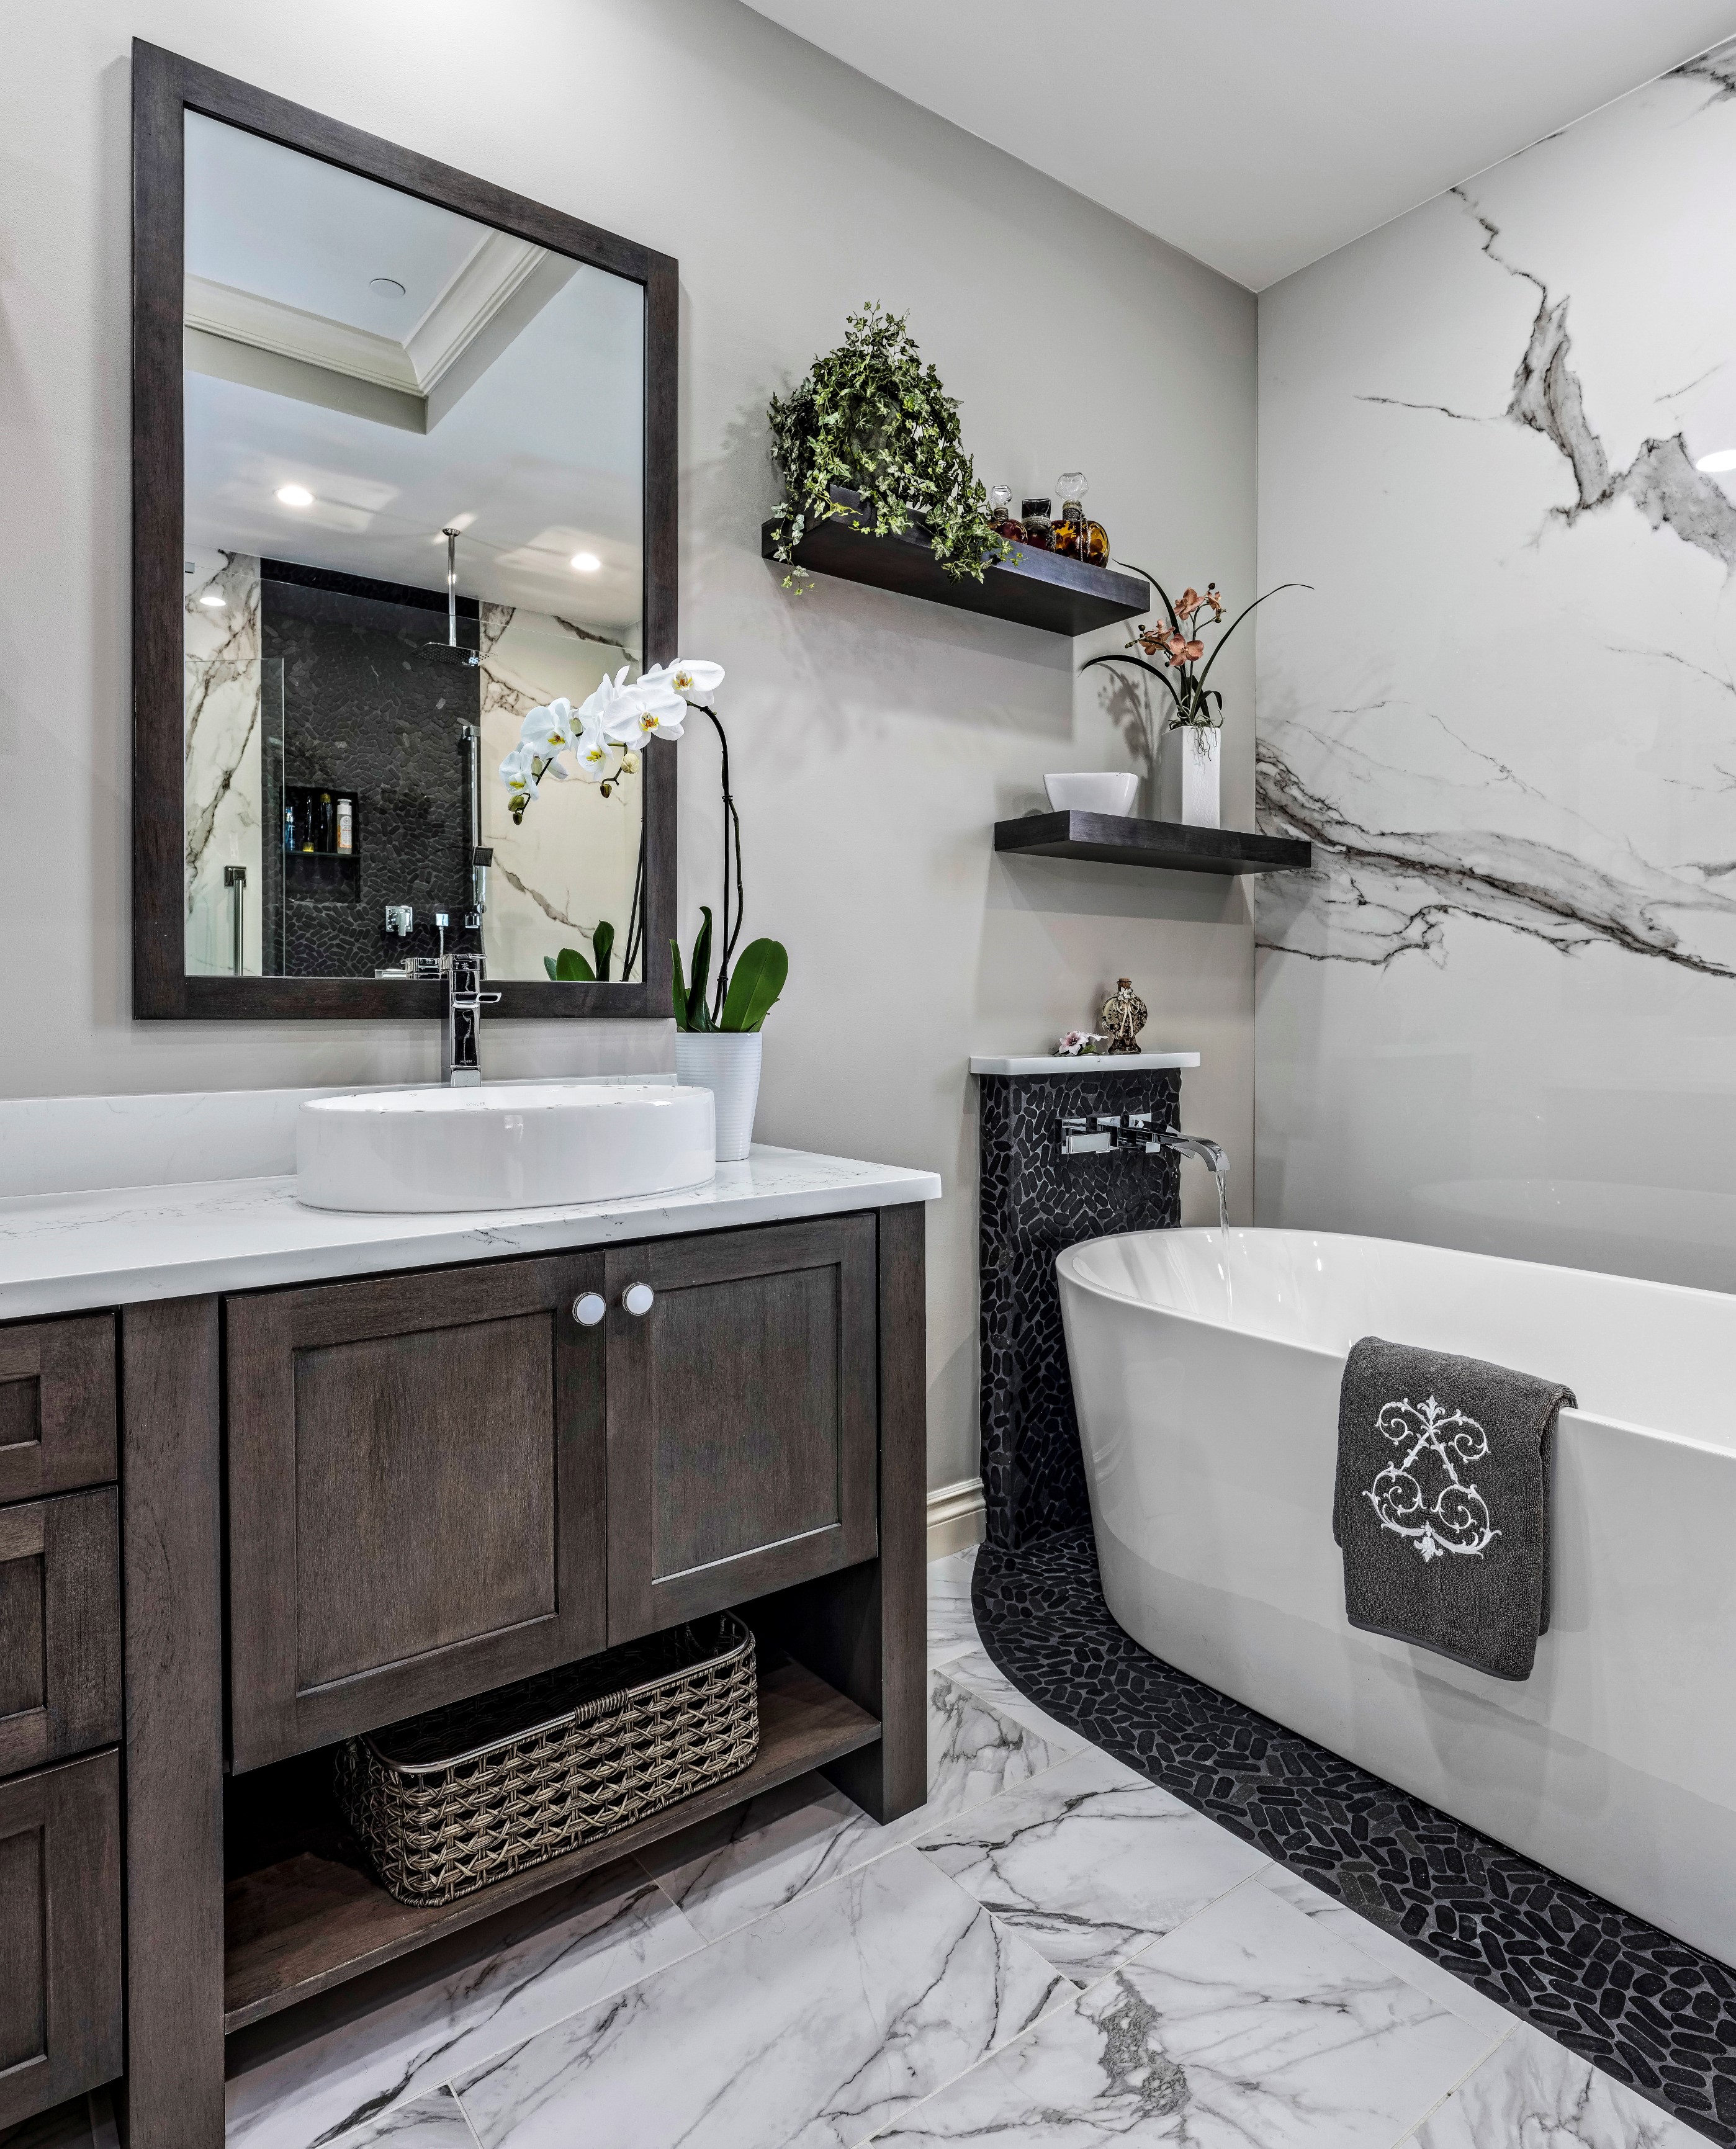 How Much Does Bathroom Remodeling Typically Cost Ann Arbor Dreammaker Bath Kitchen